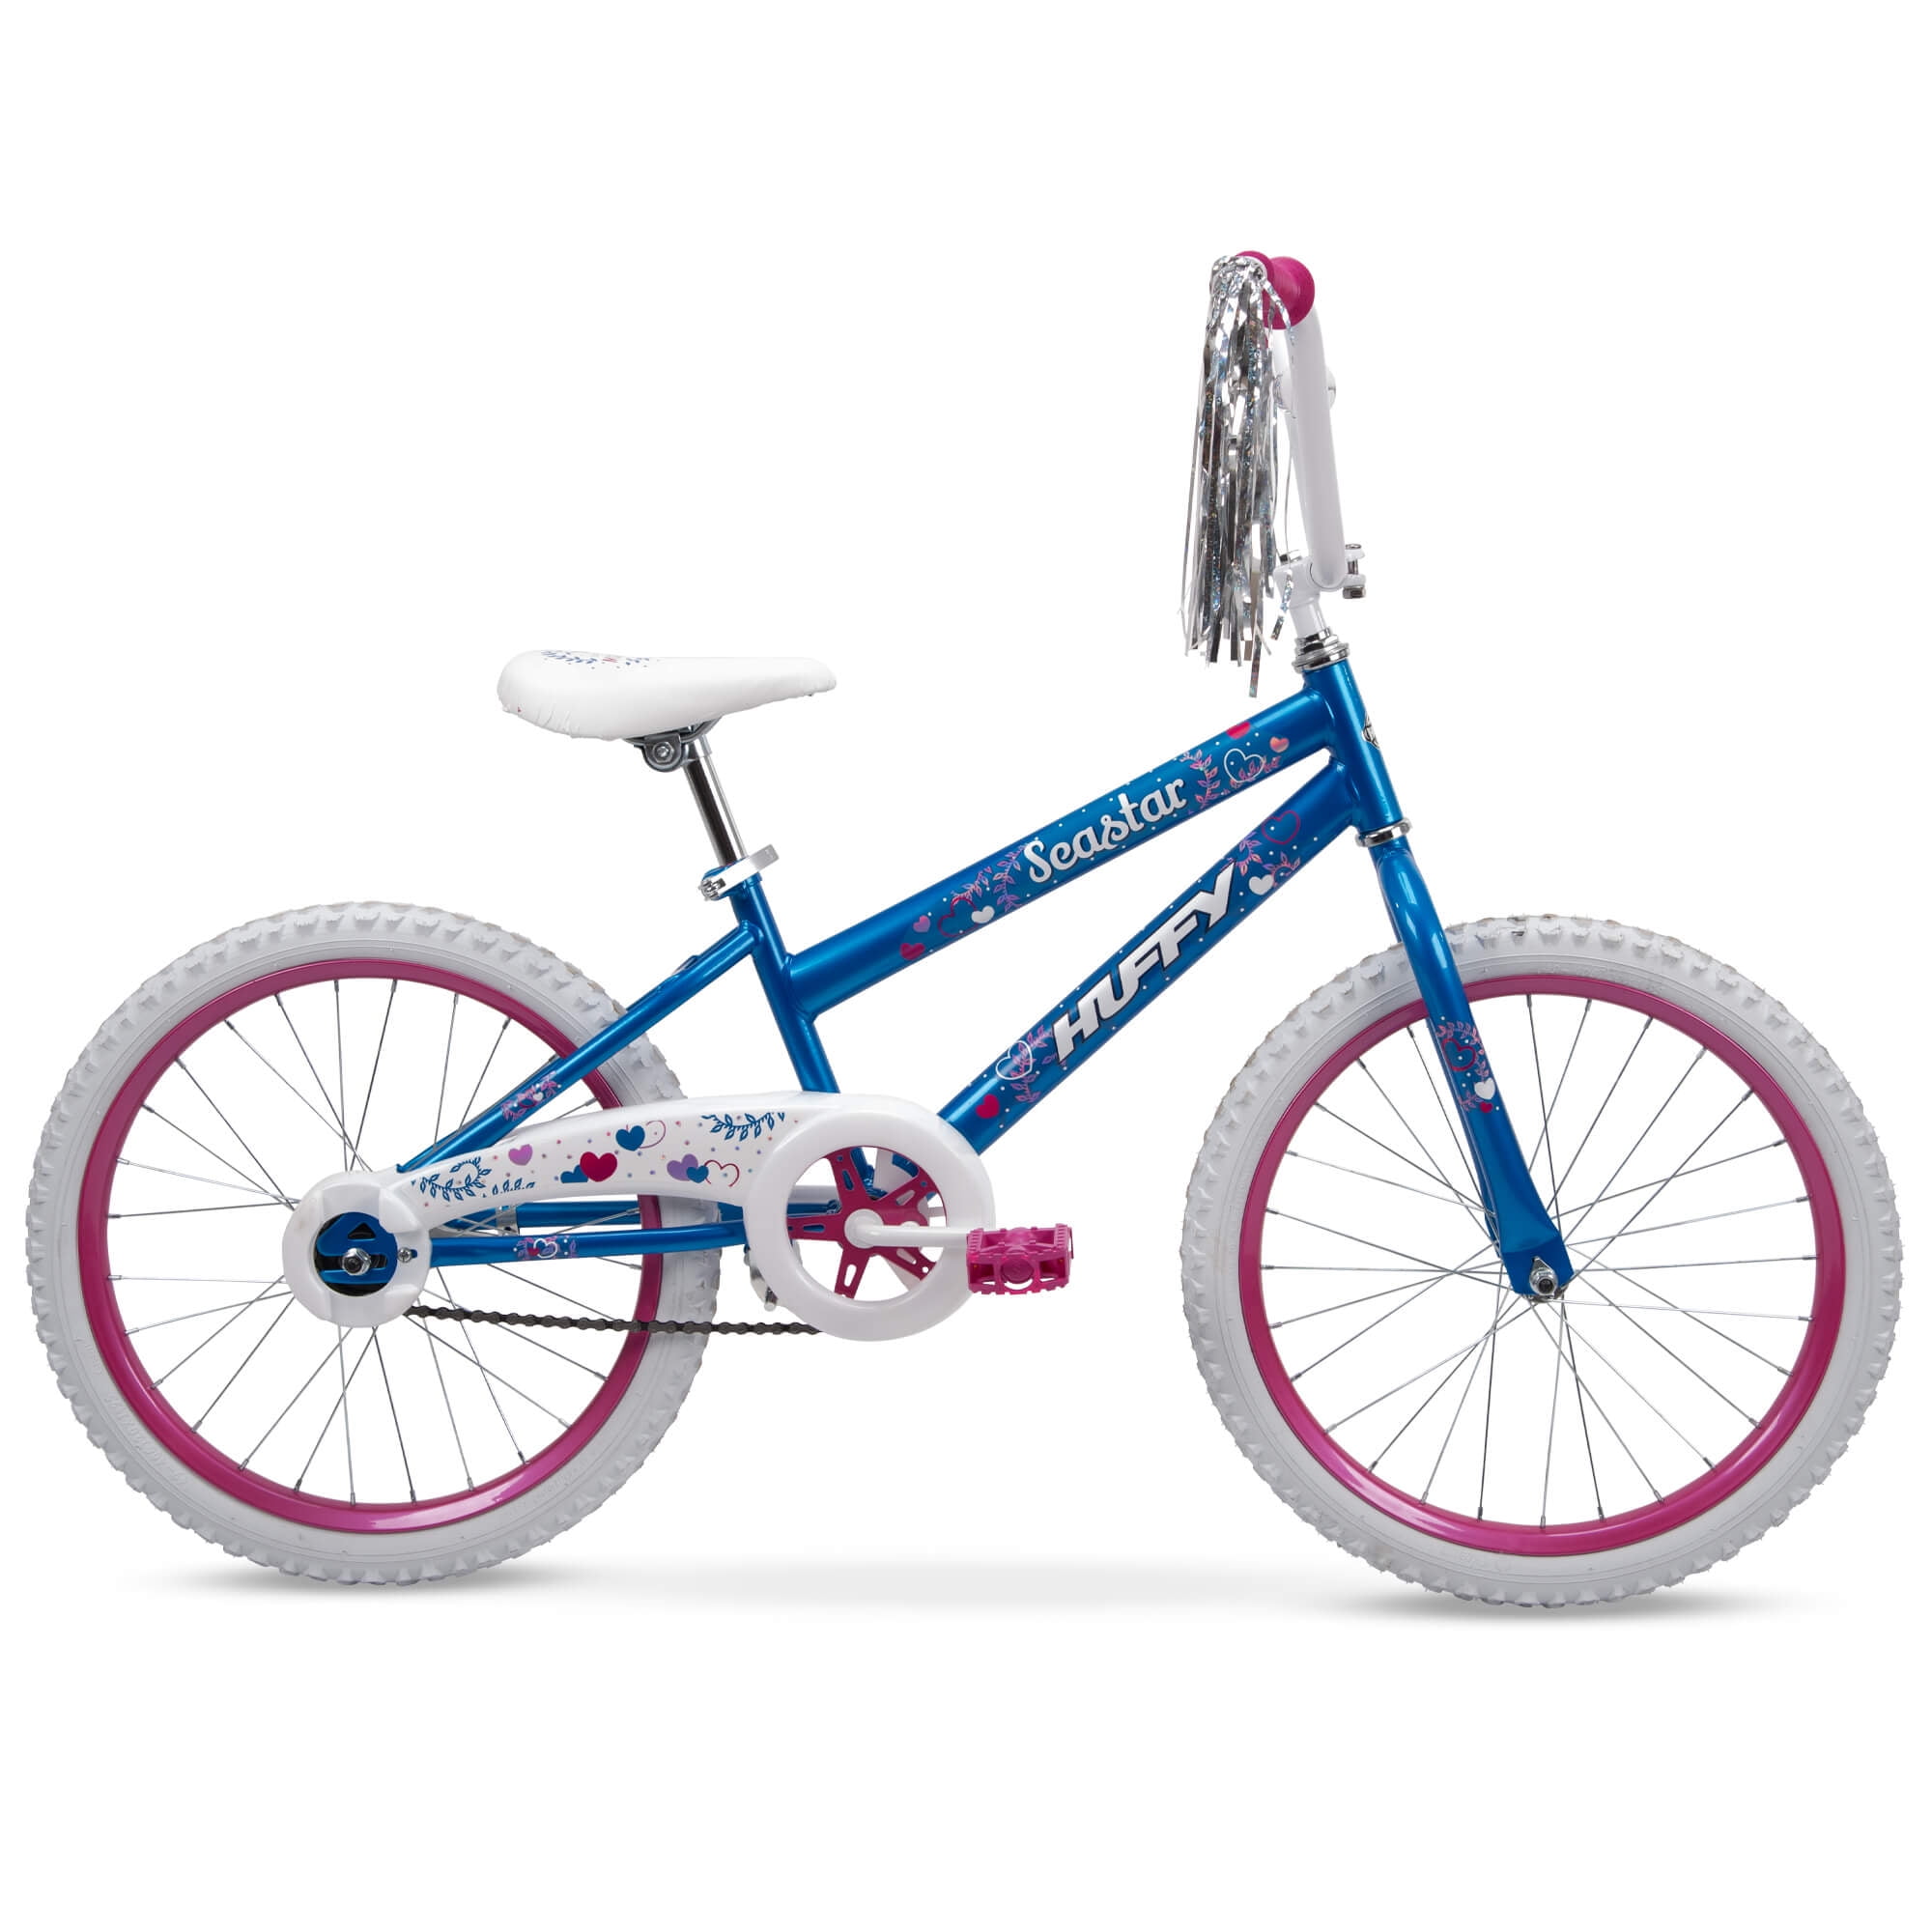 Huffy 20 and Girls Bike Child, up, 5 and for in. Star Sea Ages Blue Pink Kids